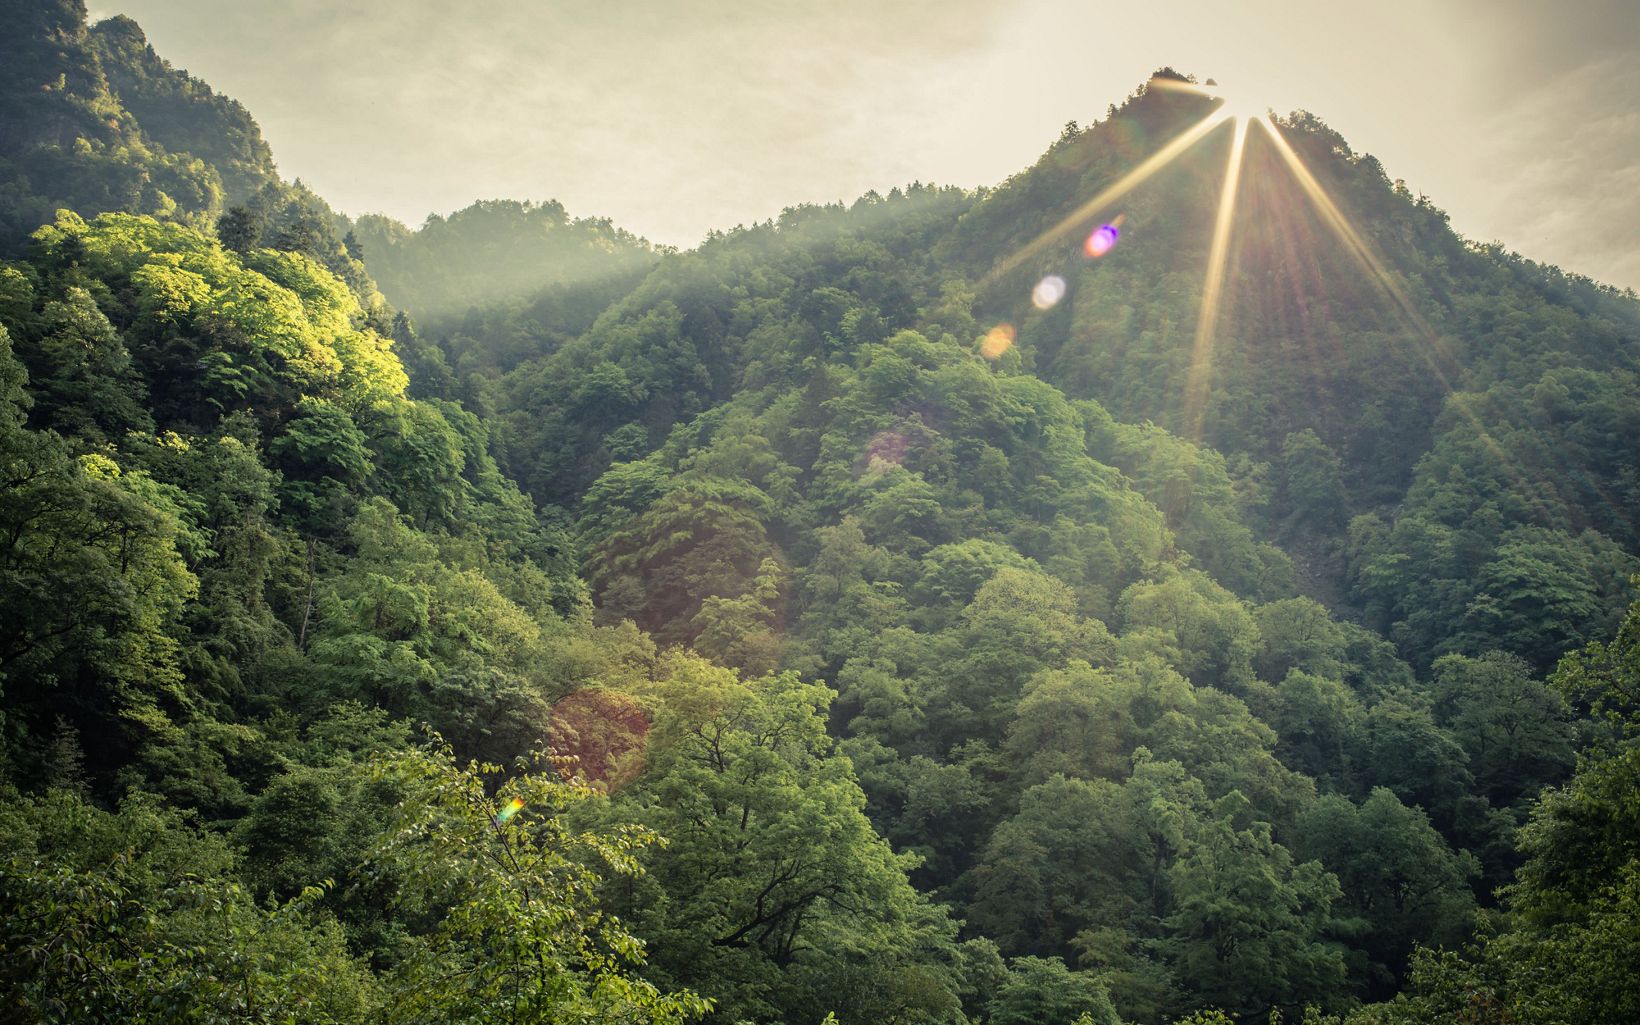 A view of the steep mountains and tree covered ridge lines of Laohegou Nature Reserve, Pingwu County, Sichuan Province, China. 